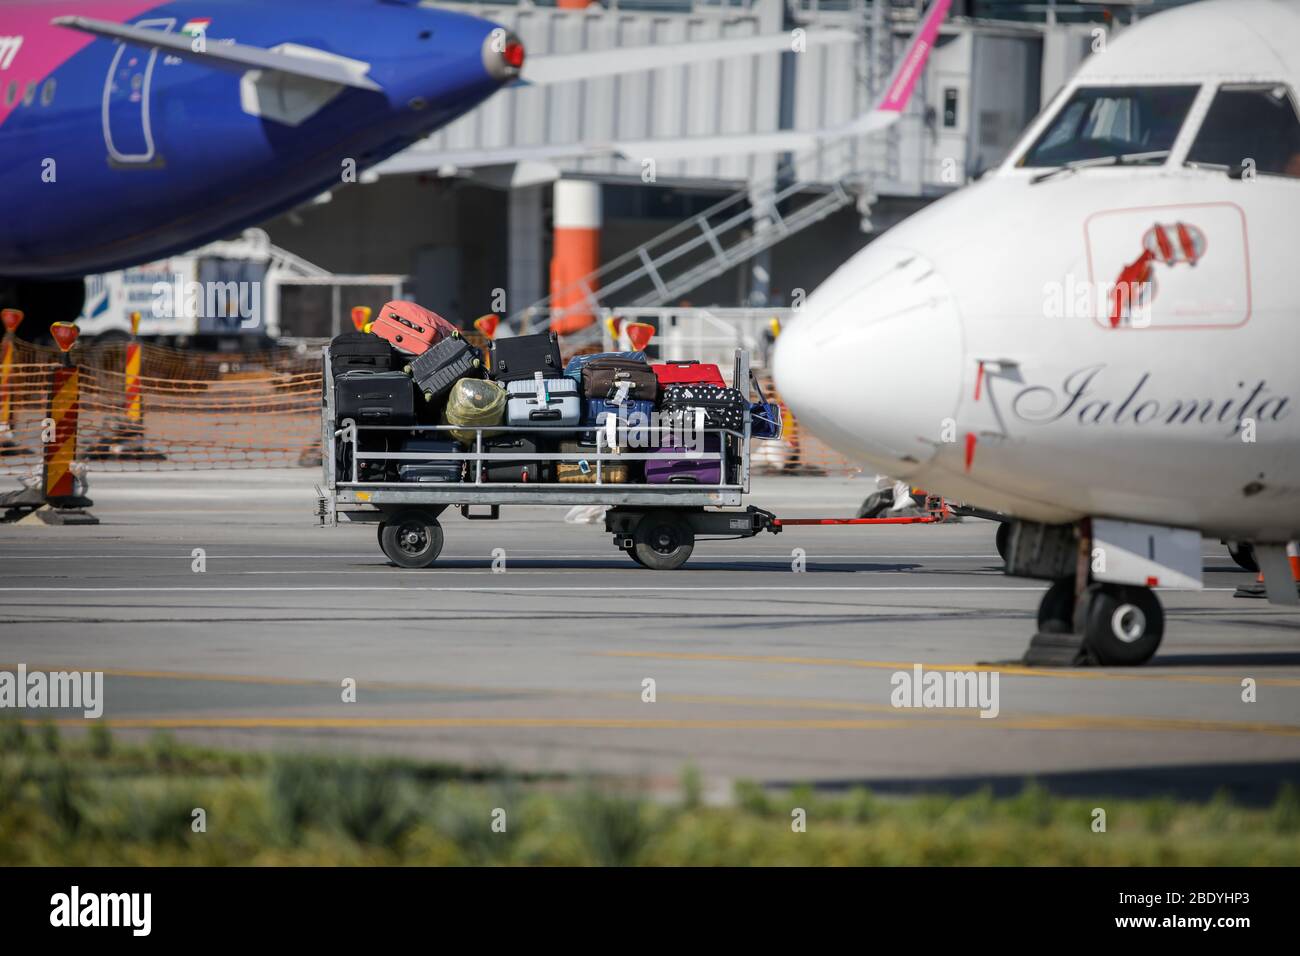 Otopeni, Romania - April 9, 2020: Luggages on baggage carrier on the Henri Coanda International Airport taxiway. Stock Photo